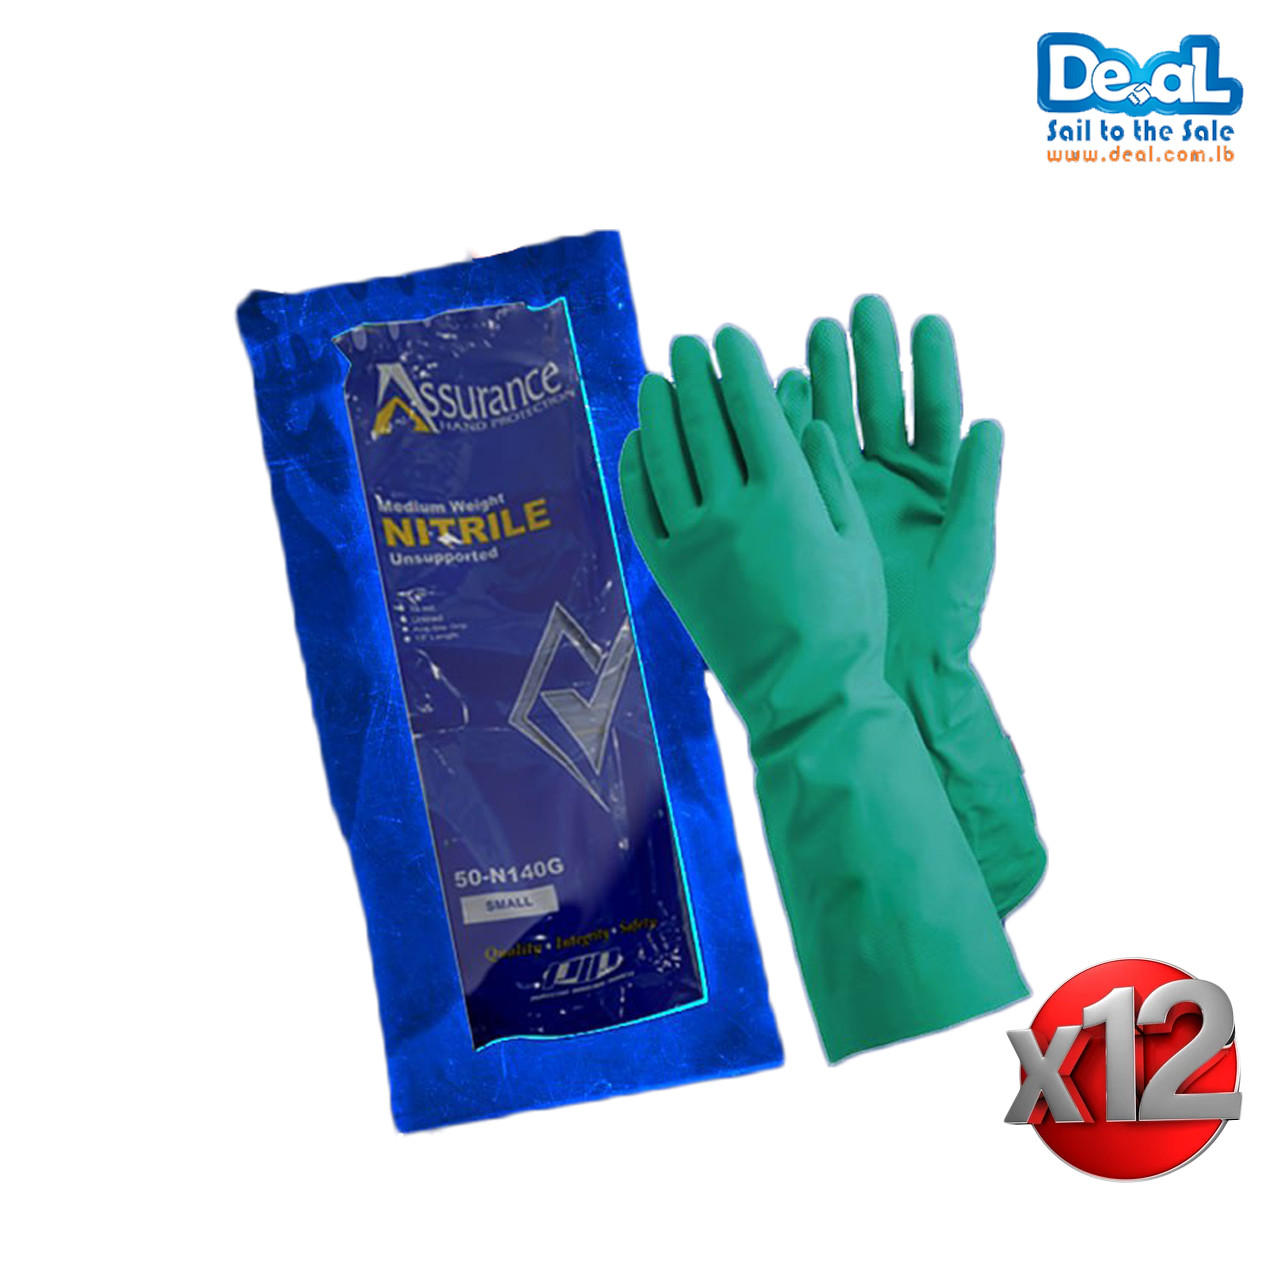 Medium Weight Nitrile Hand Protection Gloves 12 pairs 50-N140G